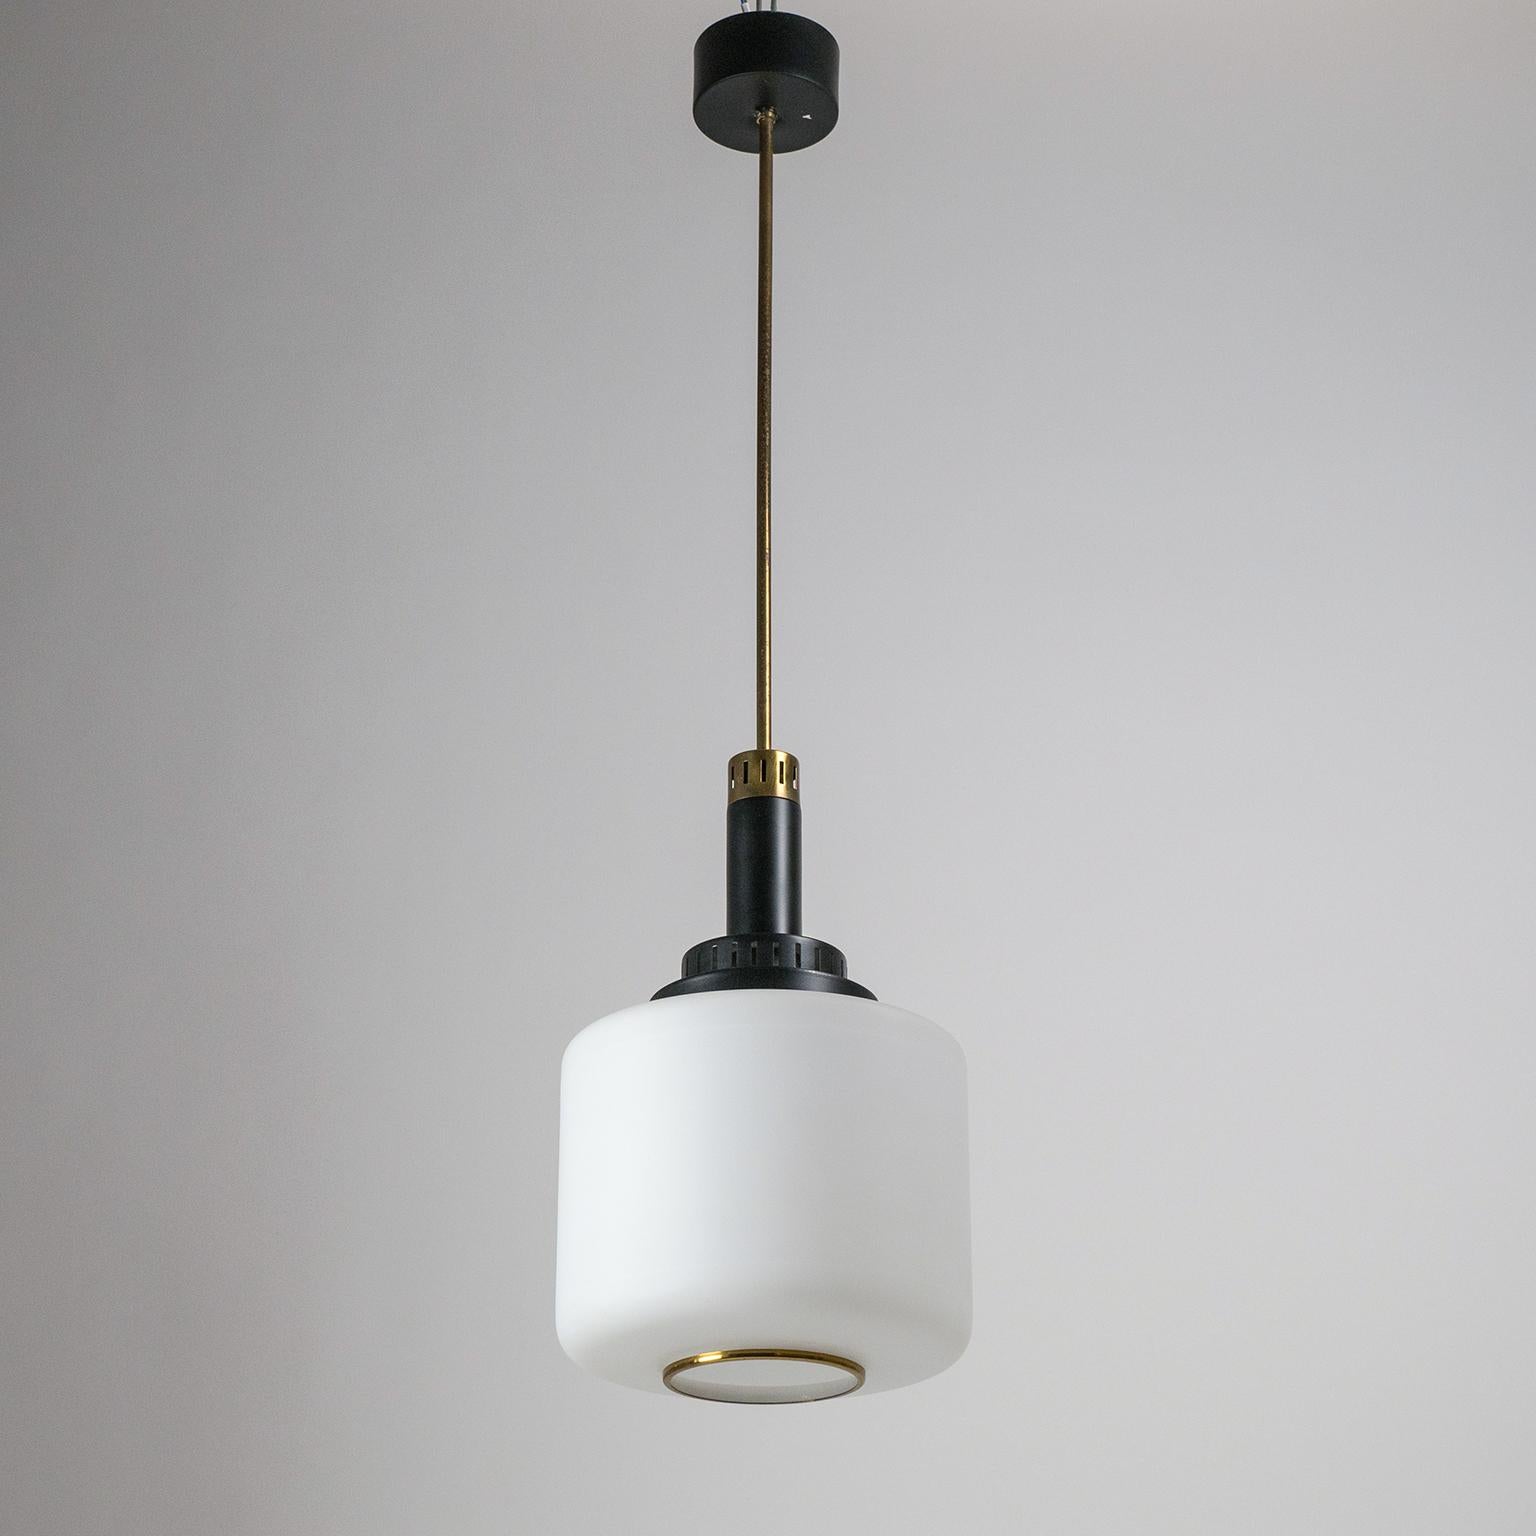 Classic midcentury Italian pendants by Stilux. They have good sized satin glass diffusers, brass details and tiered and pierced aluminium elements in black. Both are in very good original condition with minimal loss of original paint and a nice